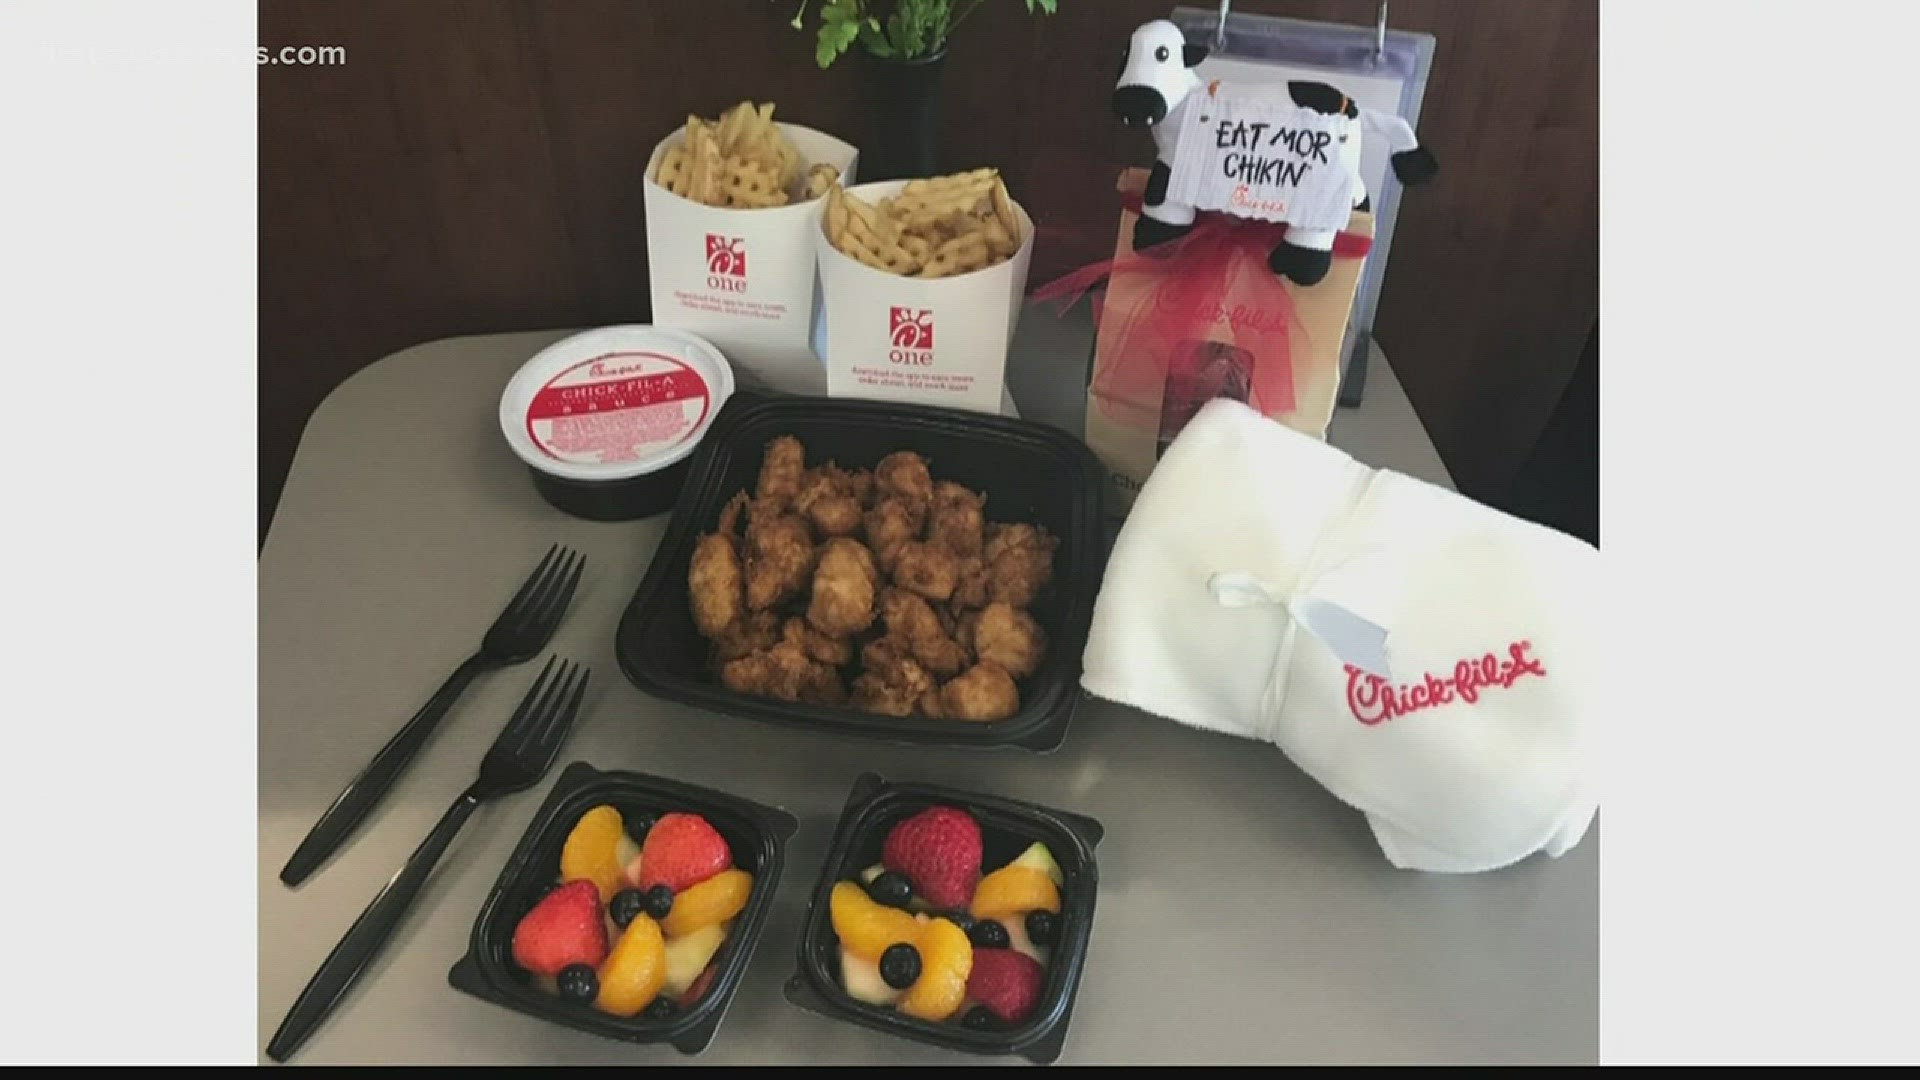 We made calls to check and see if Chick-Fil-A locations in Jacksonville are participating in a possible program that offers free items to expectant mothers.